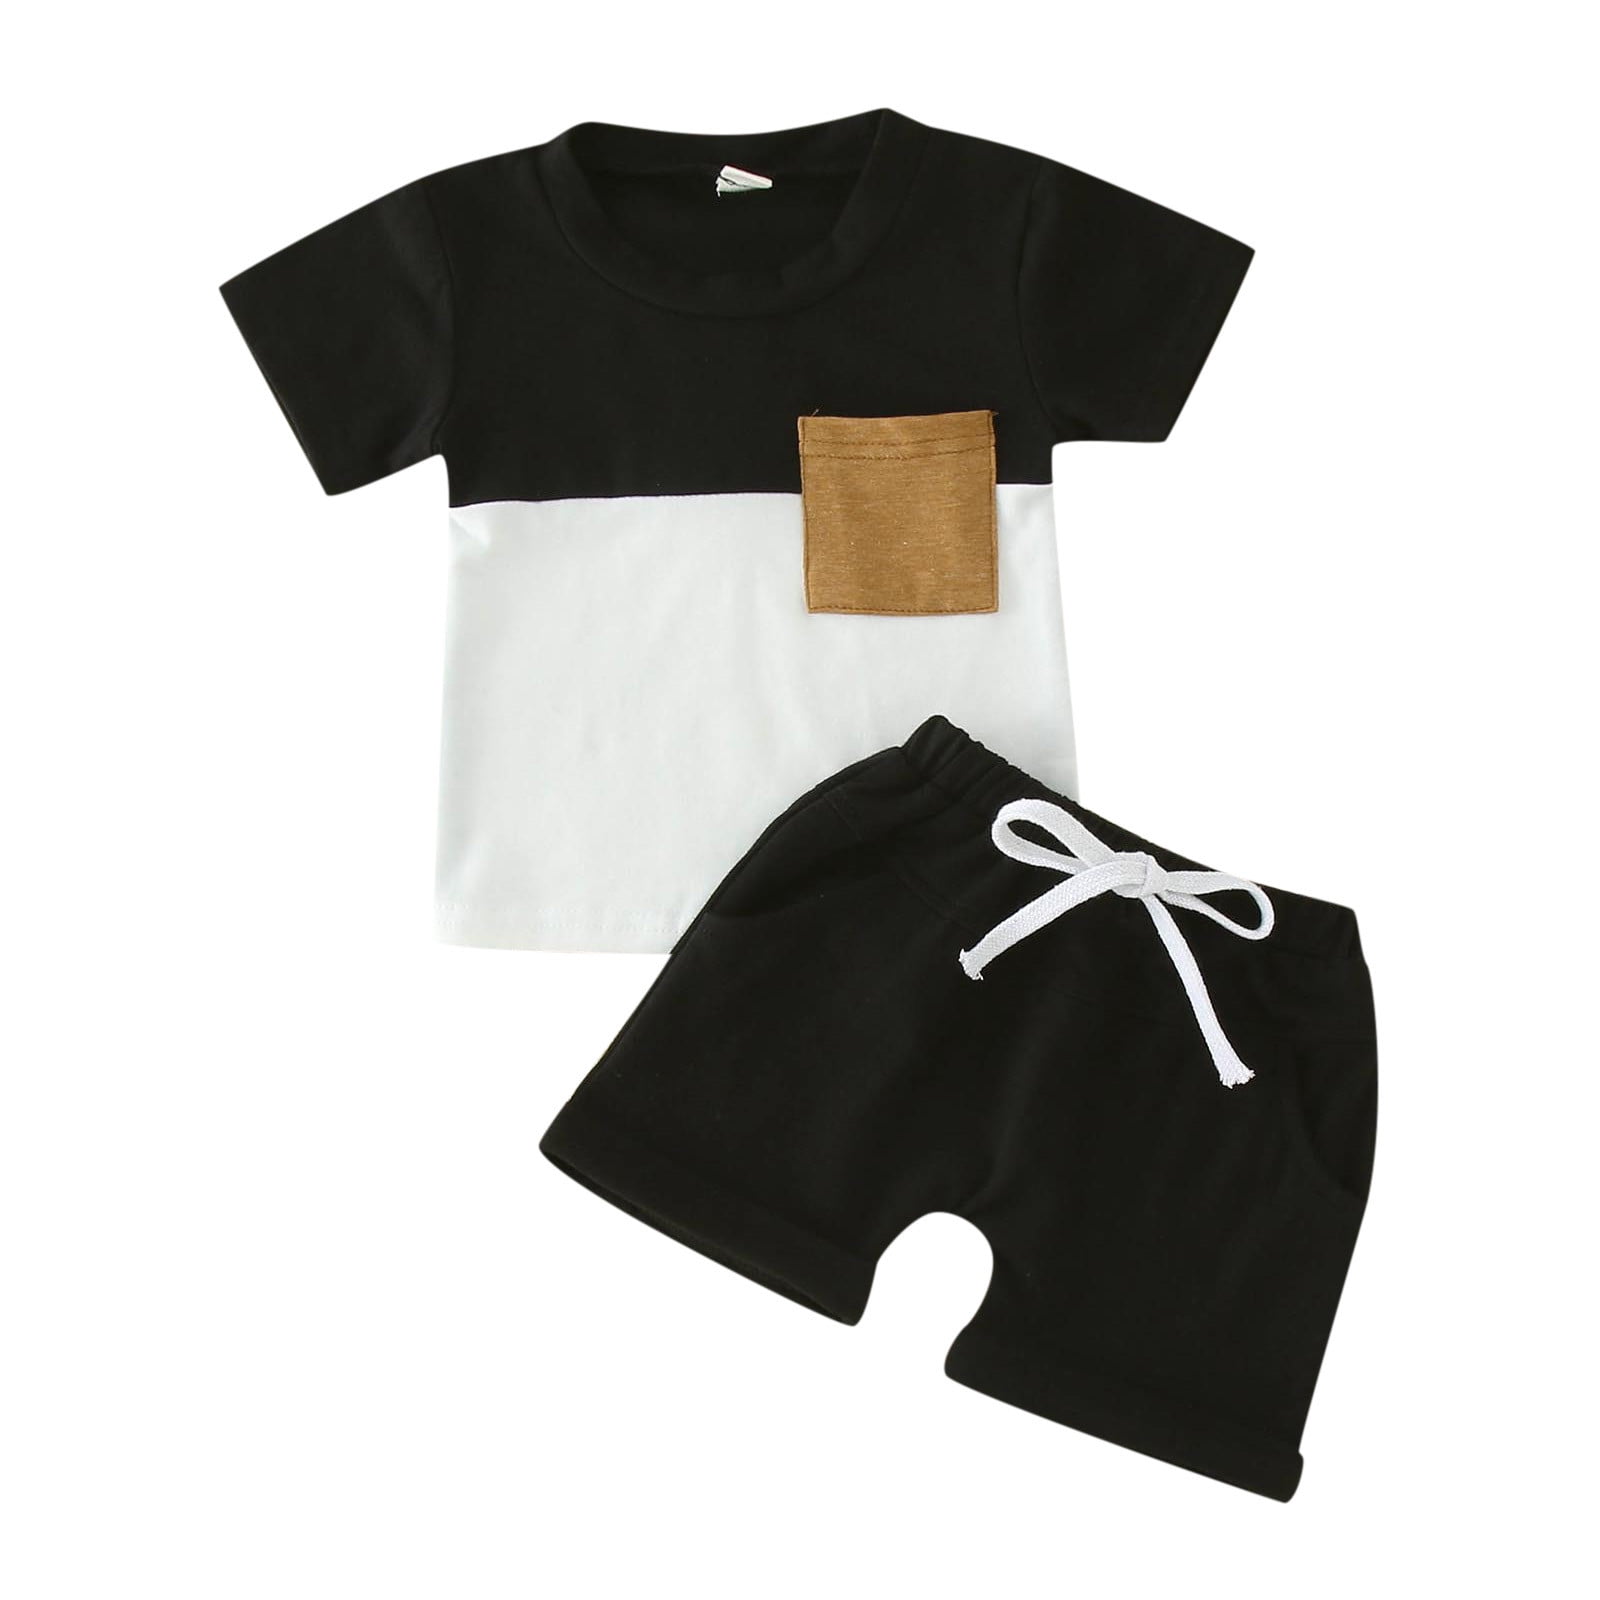  Baby Toddler Boys Outfit Summer Short Sleeve Top